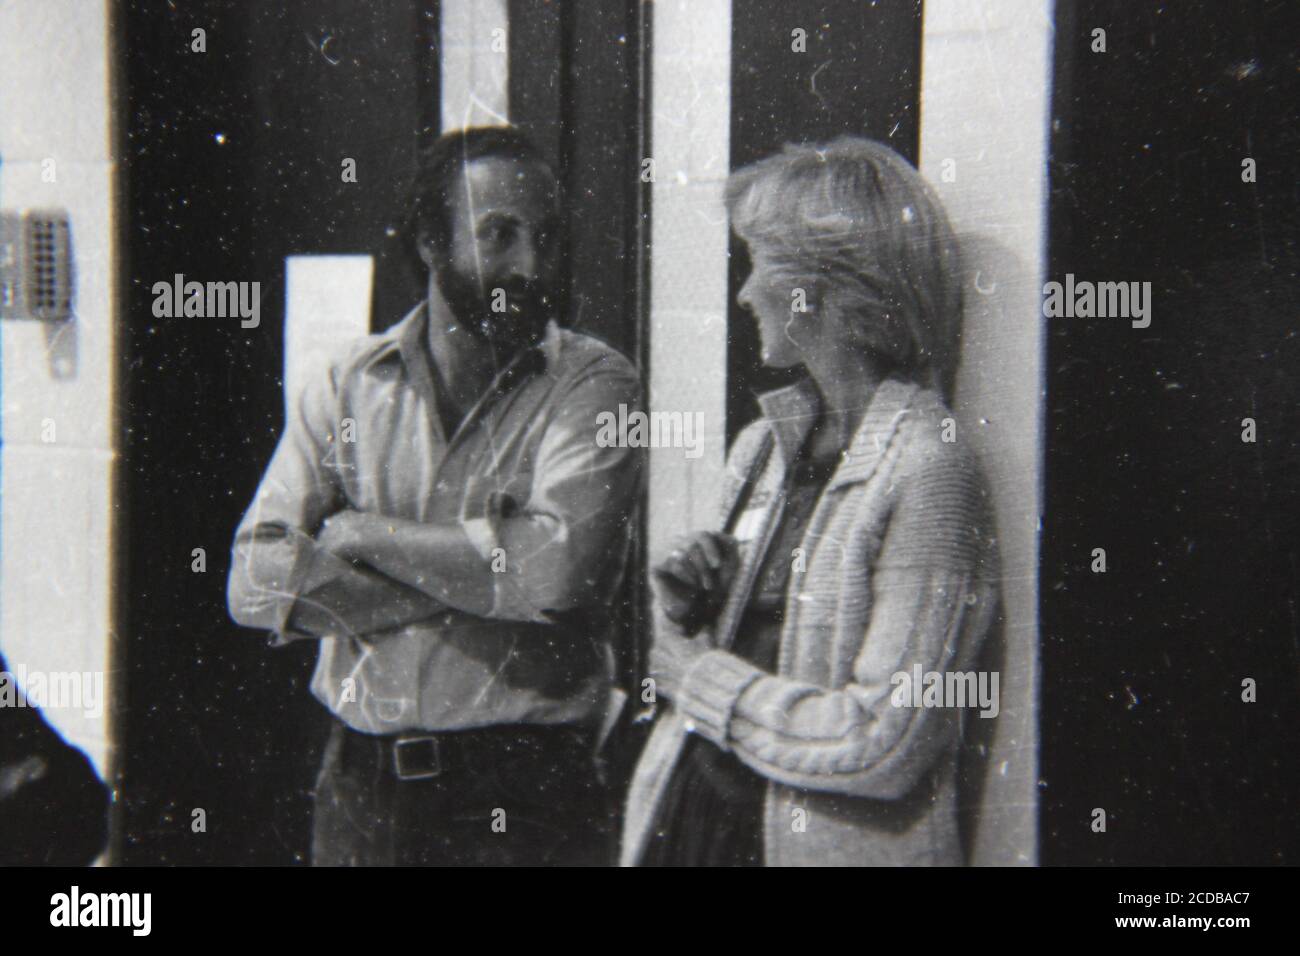 Fine 1970s vintage black and white photography of two regular adults talking with each other. Stock Photo